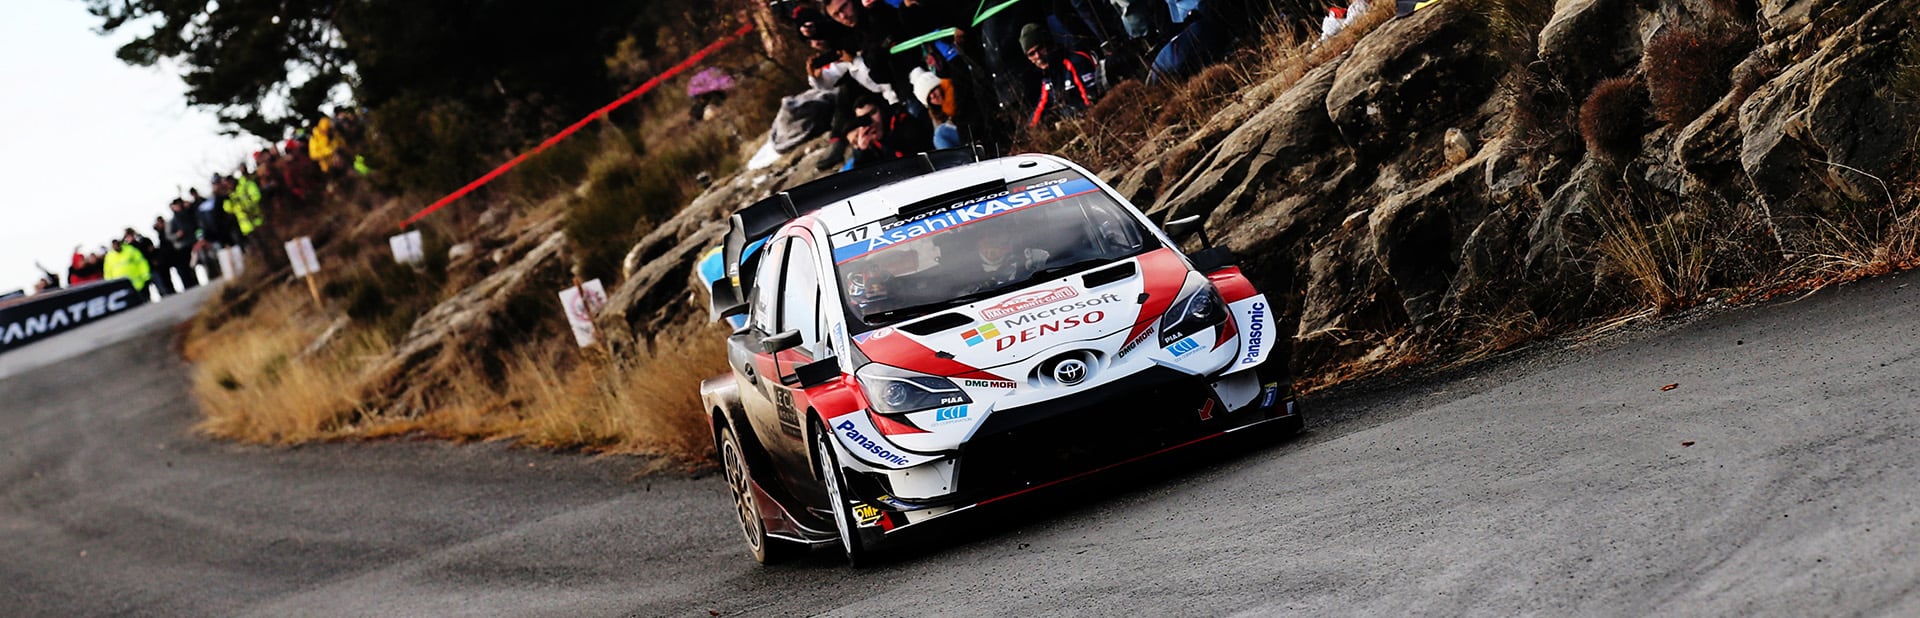 Rallye Monte-Carlo: Day 4 Double podium in Monte Carlo for new Toyota Yaris WRC drivers